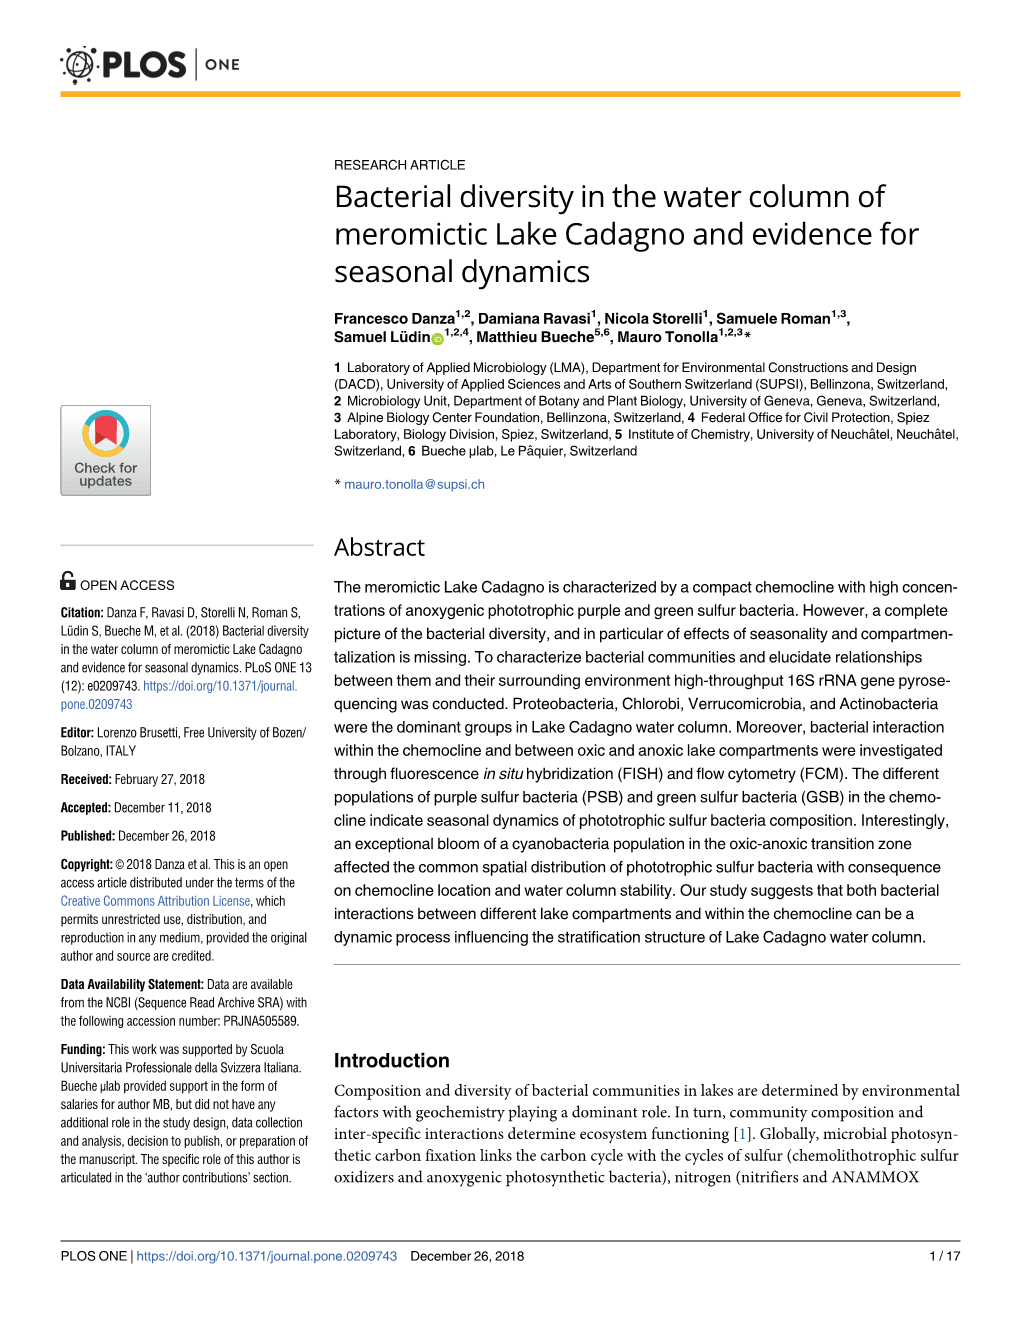 Bacterial Diversity in the Water Column of Meromictic Lake Cadagno and Evidence for Seasonal Dynamics